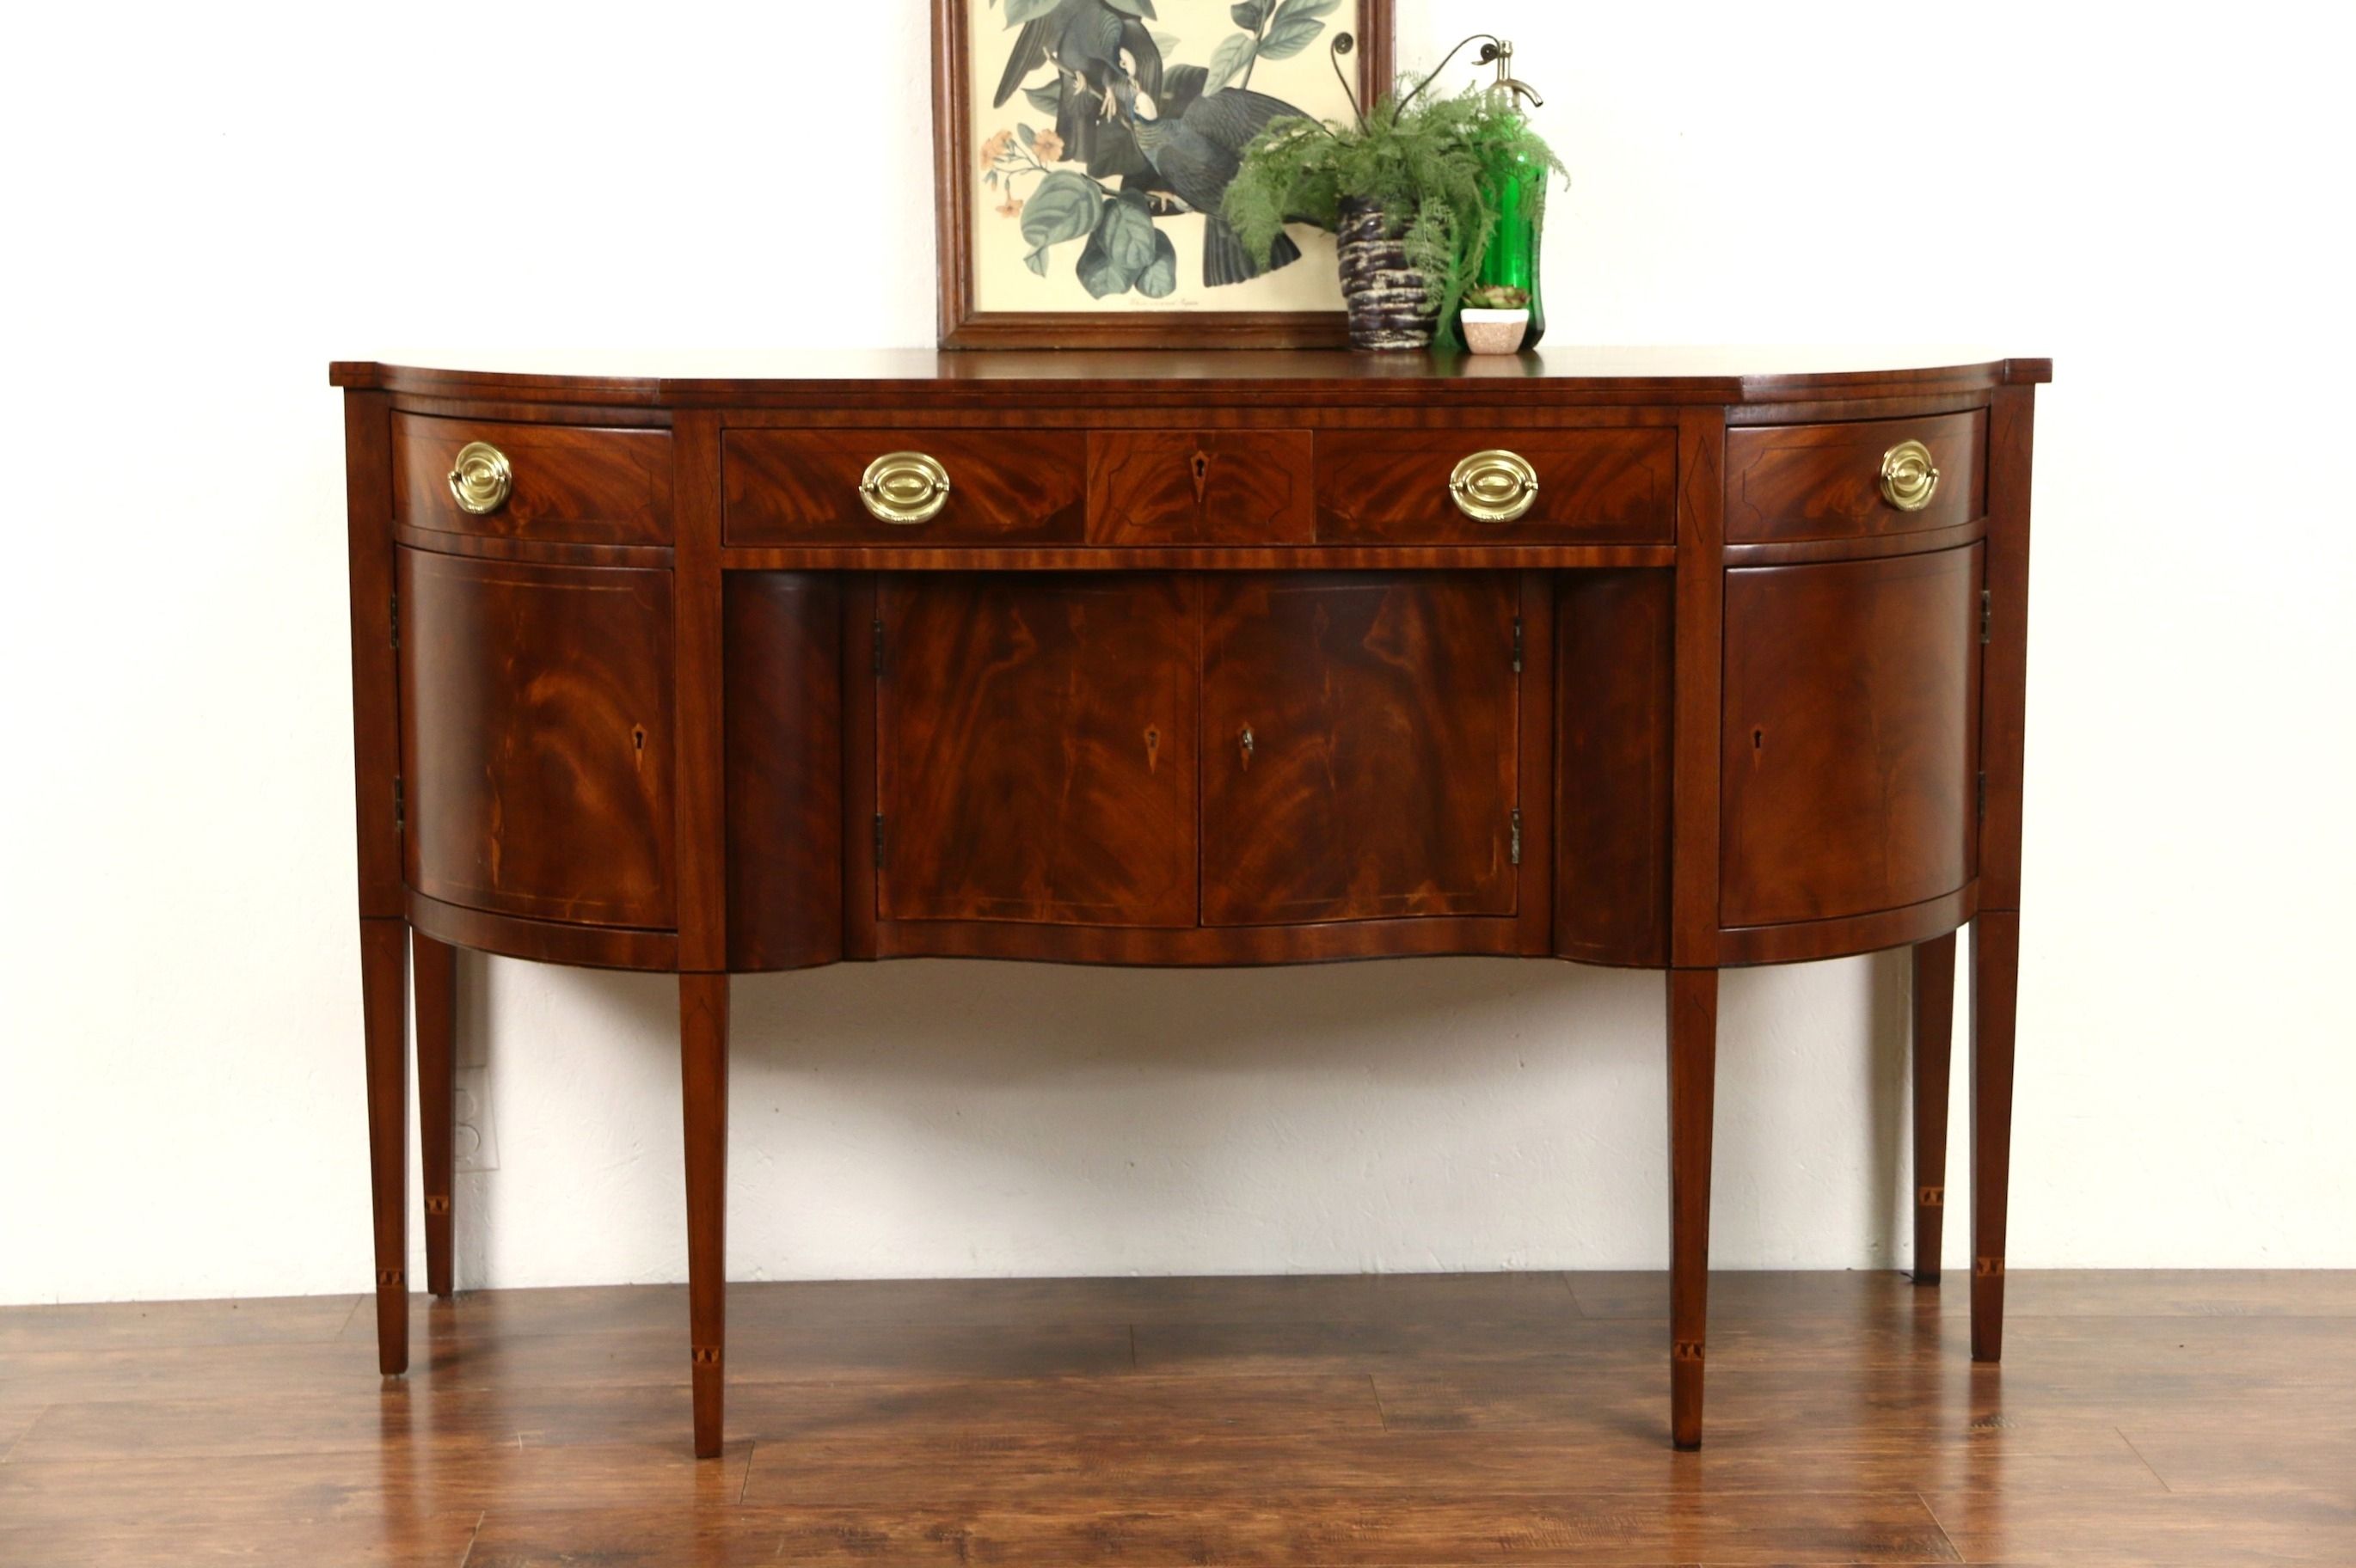 Sold – Henredon Natchez Collection Vintage Mahogany Sideboard Intended For Most Popular Vintage Brown Textured Sideboards (View 19 of 20)